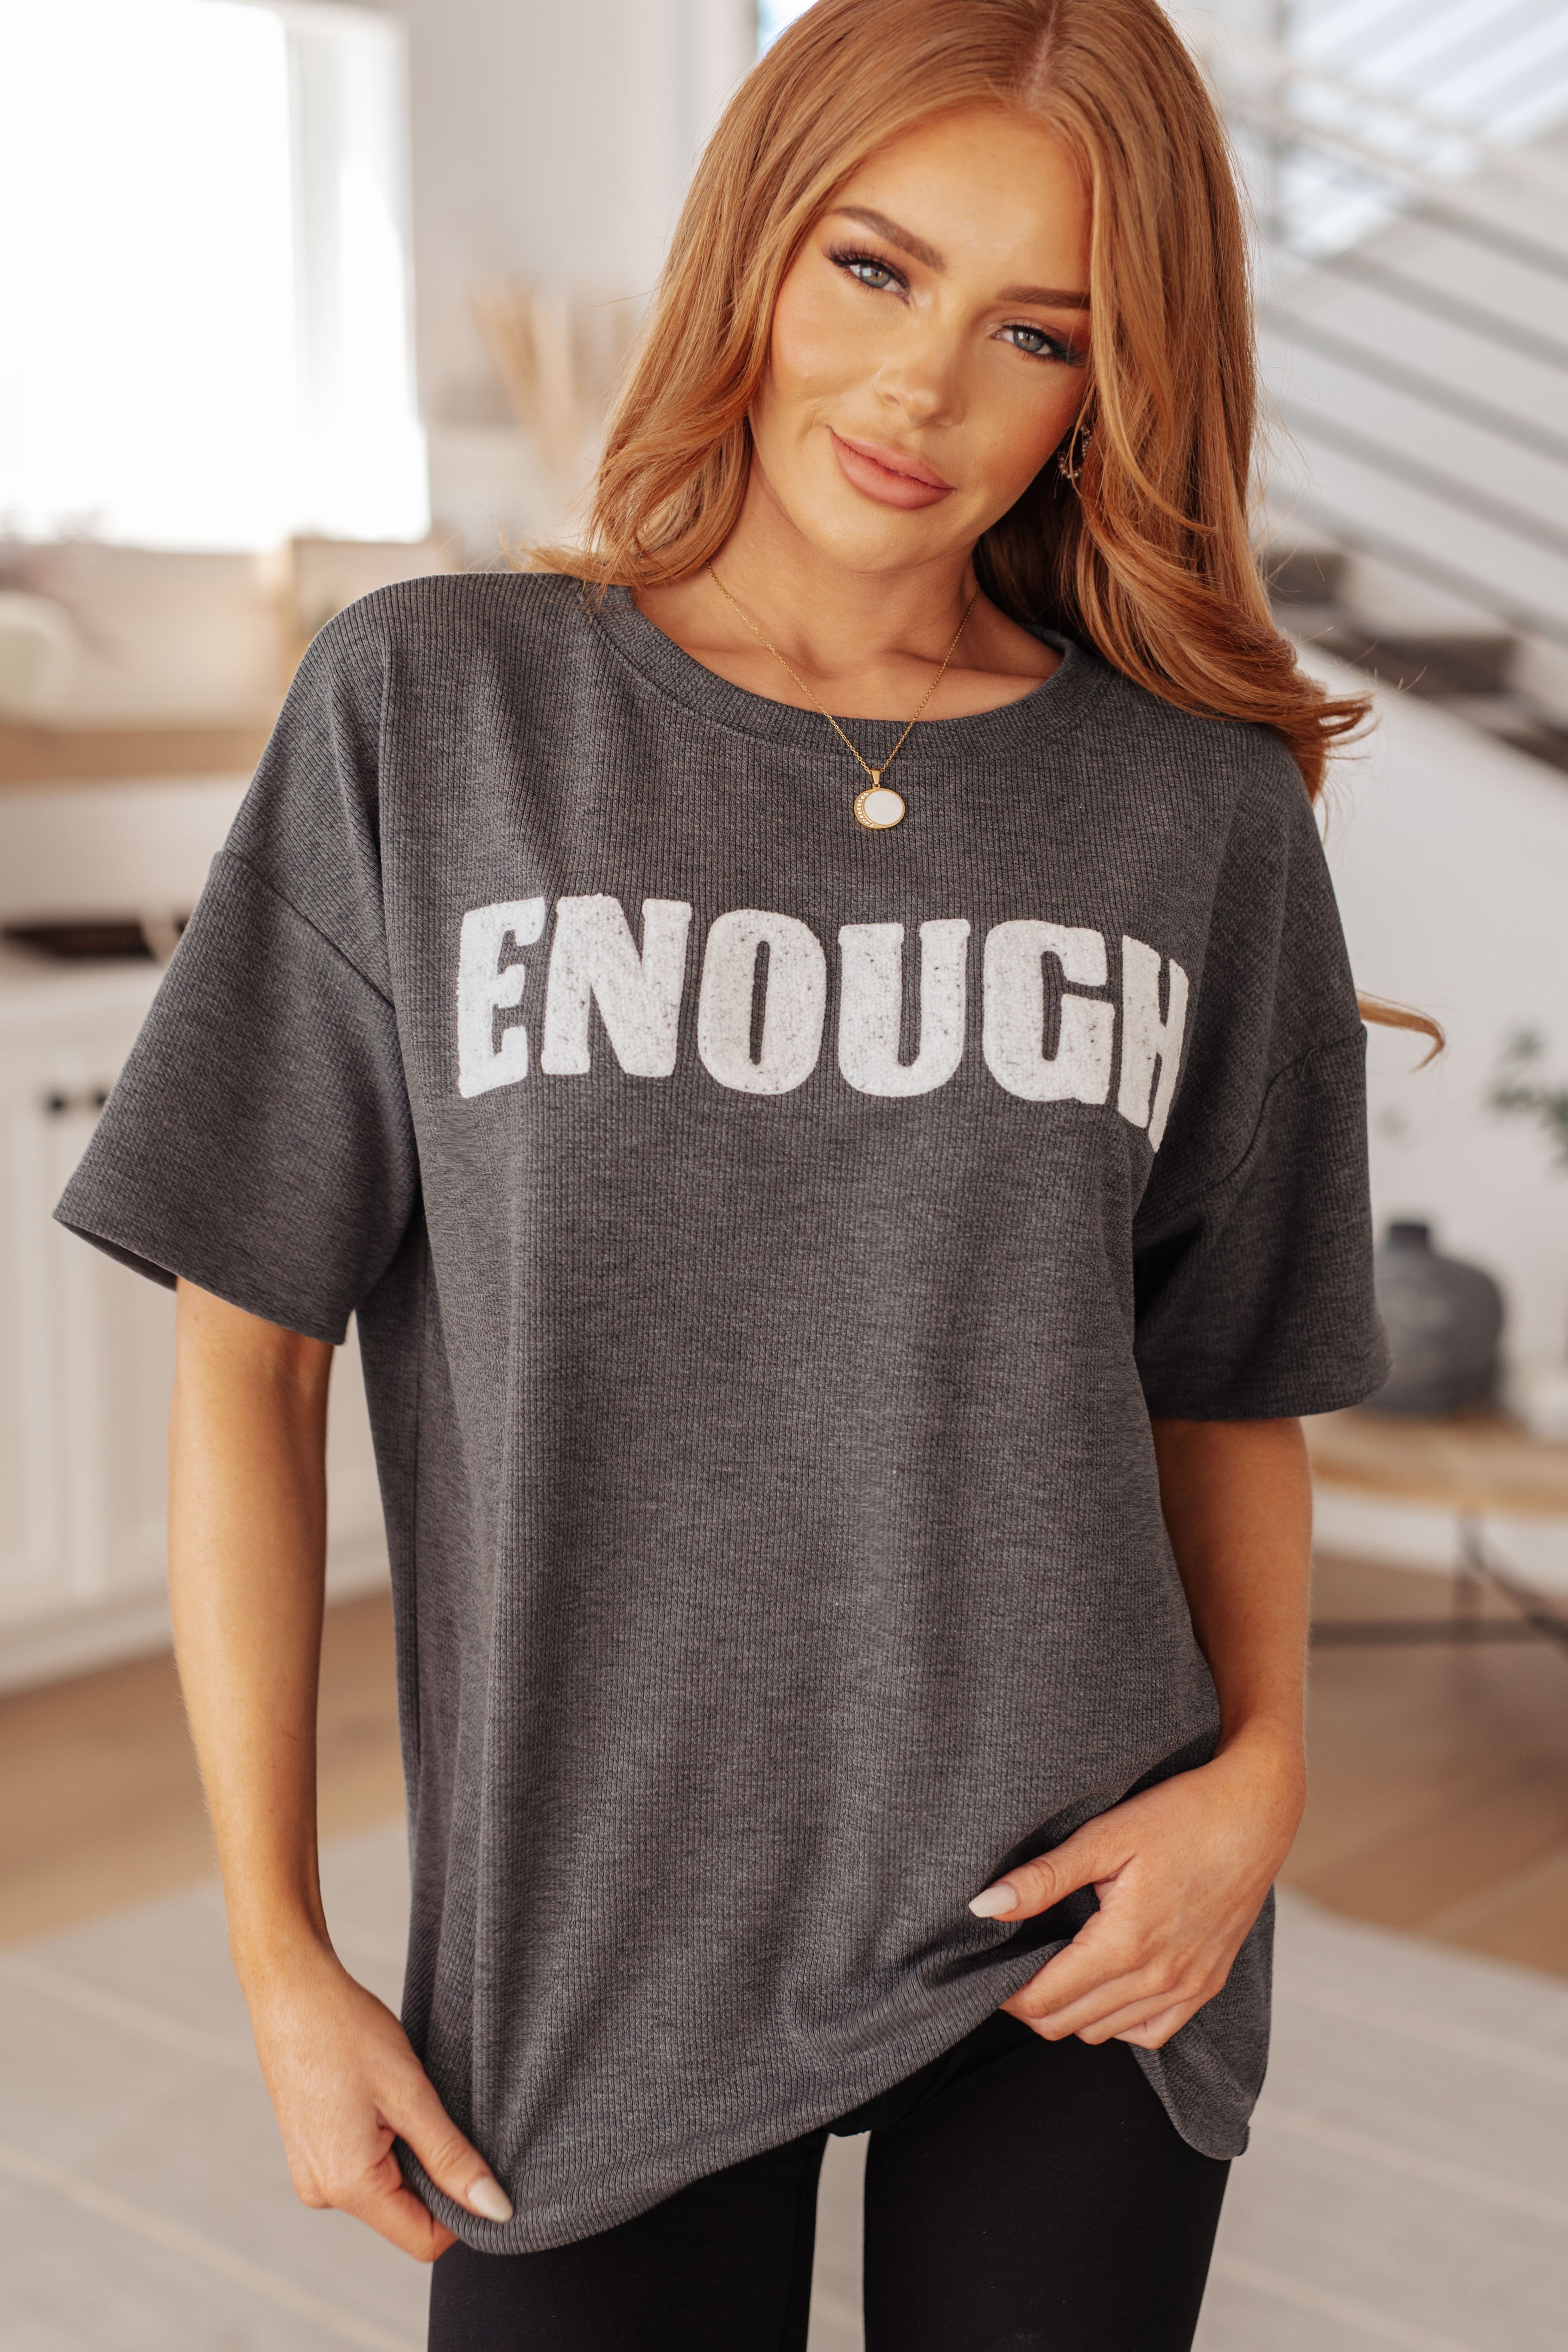 Enough Graphic Tee in Charcoal